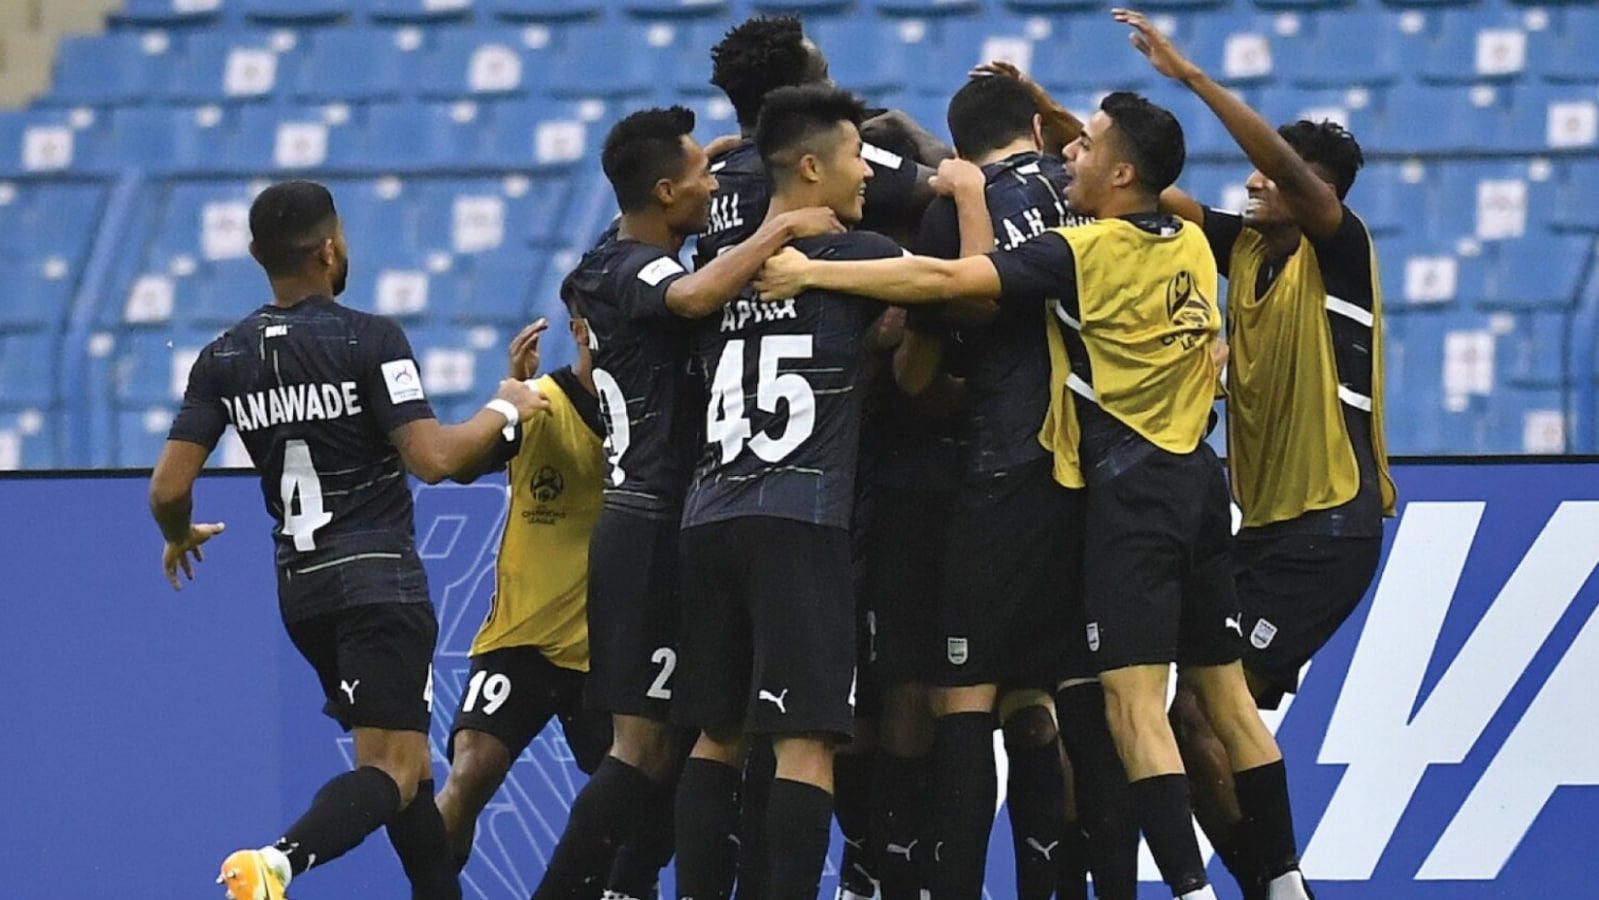 Mumbai City FC create history, beat Iraq’s Air Force Club to become first Indian side to win AFC Champions League match